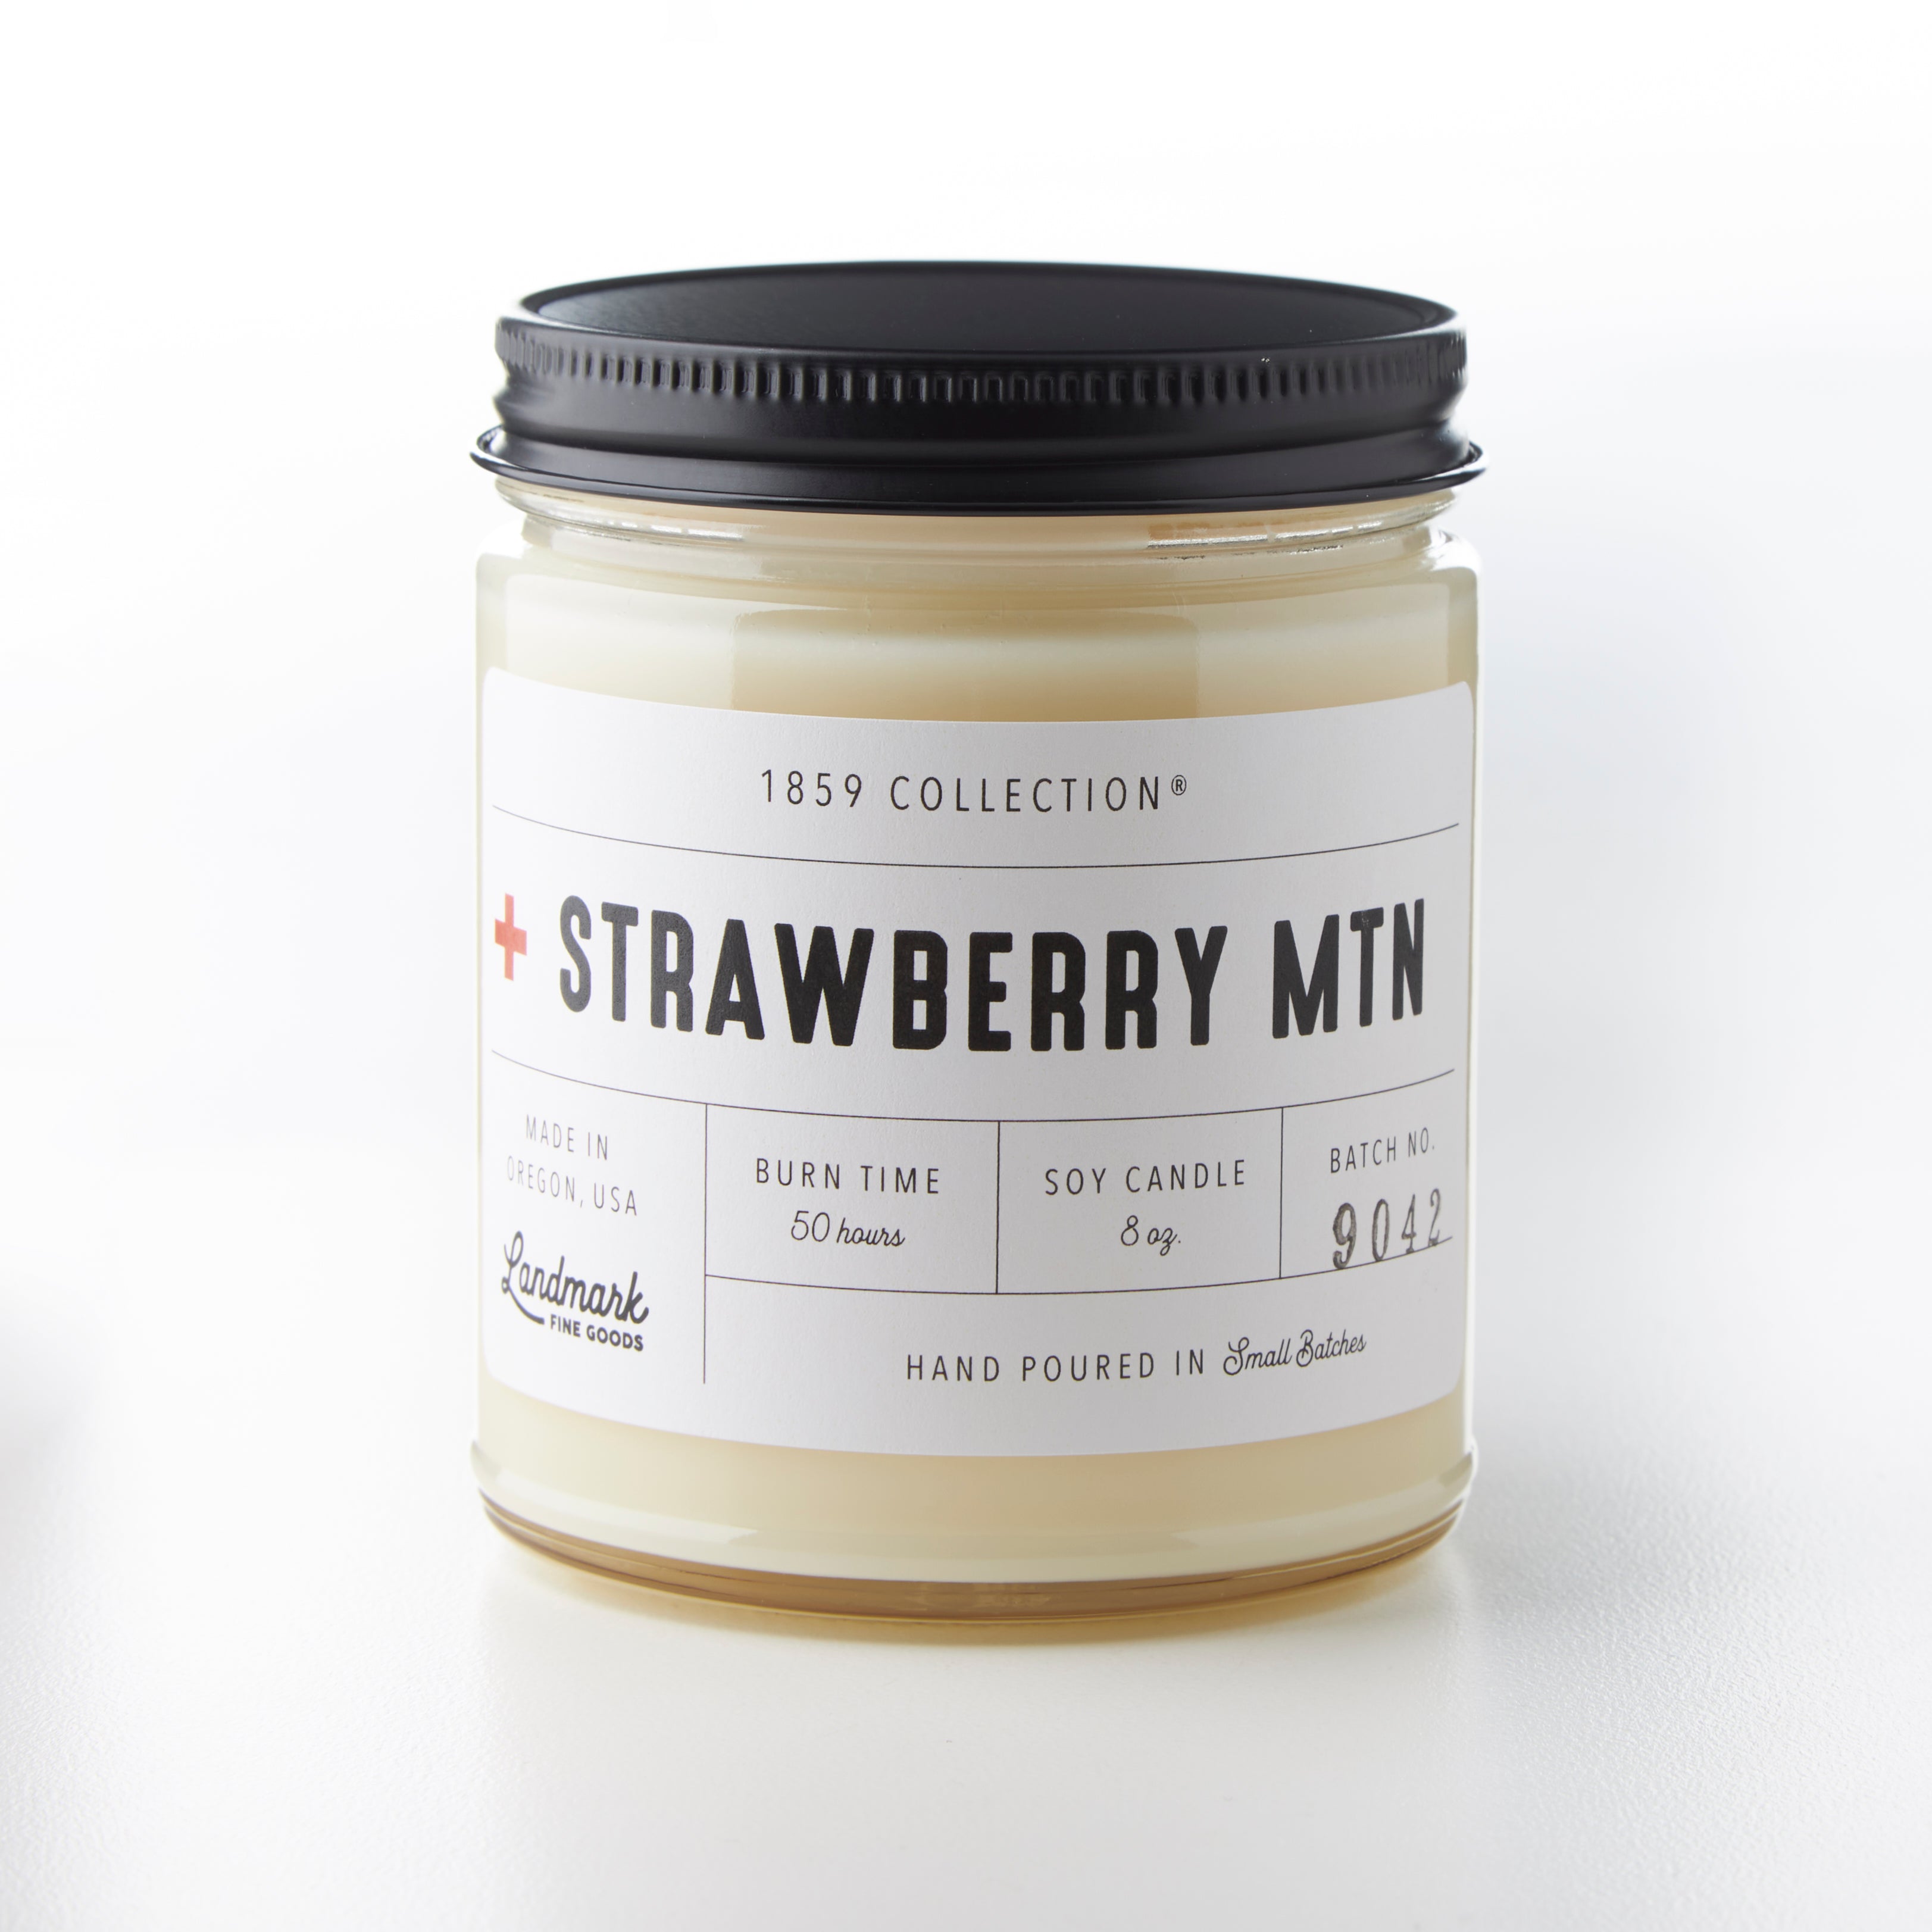 Strawberry Mountain Candle - 1859 Collection®